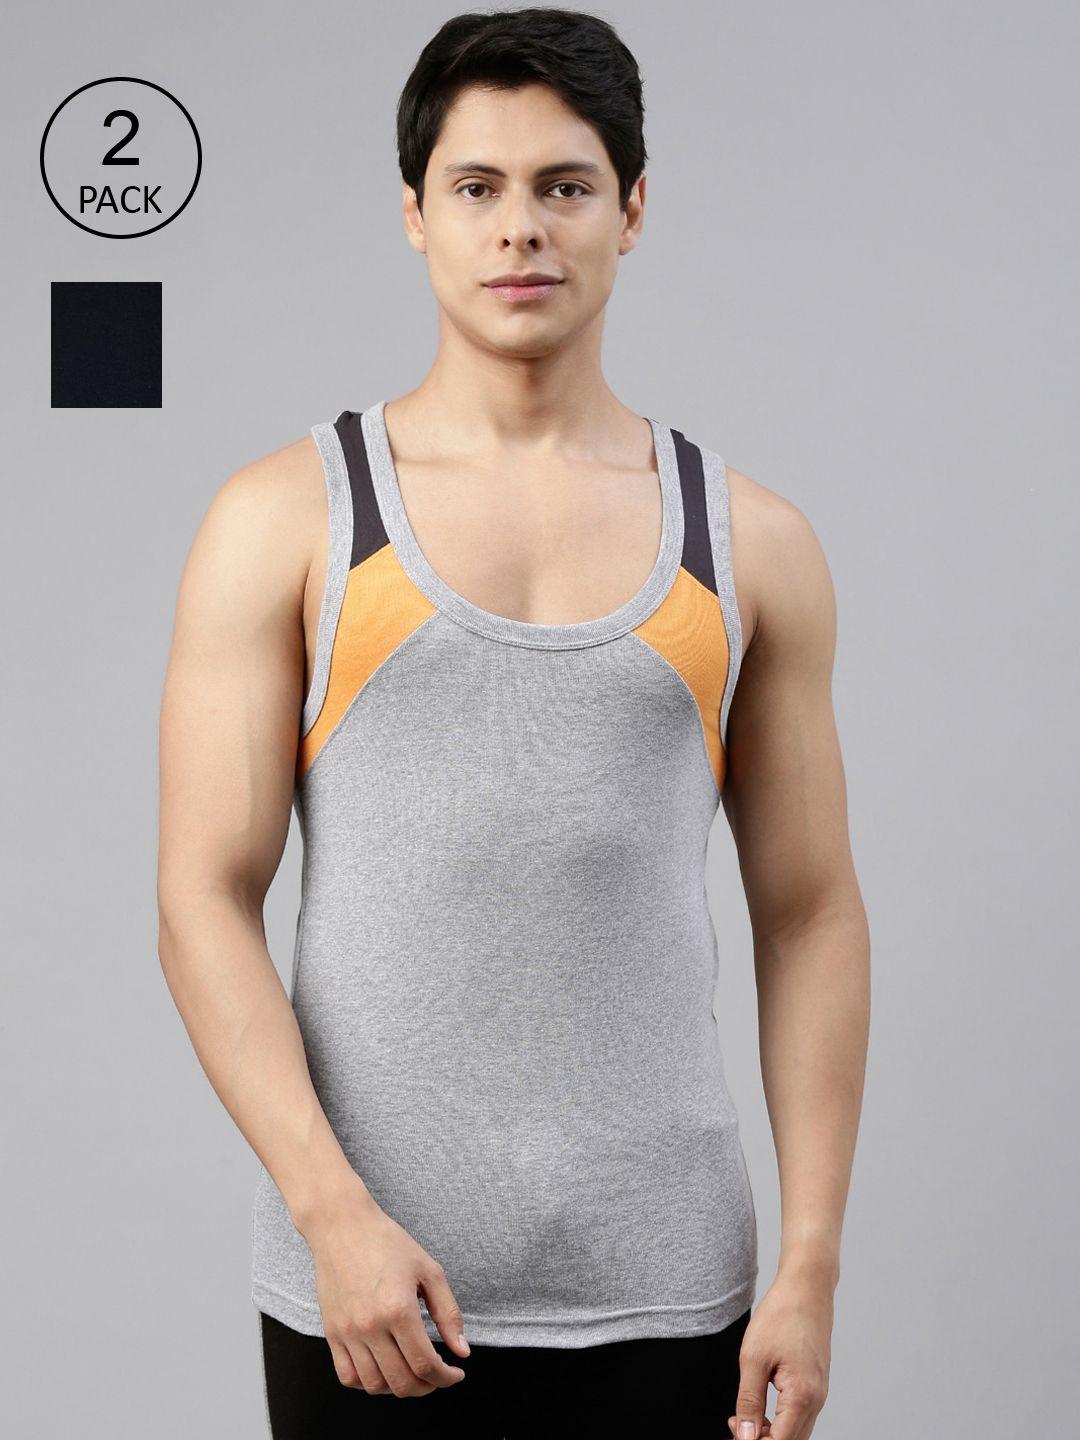 dixcy scott men pack of 2 solid combed cotton gym vests